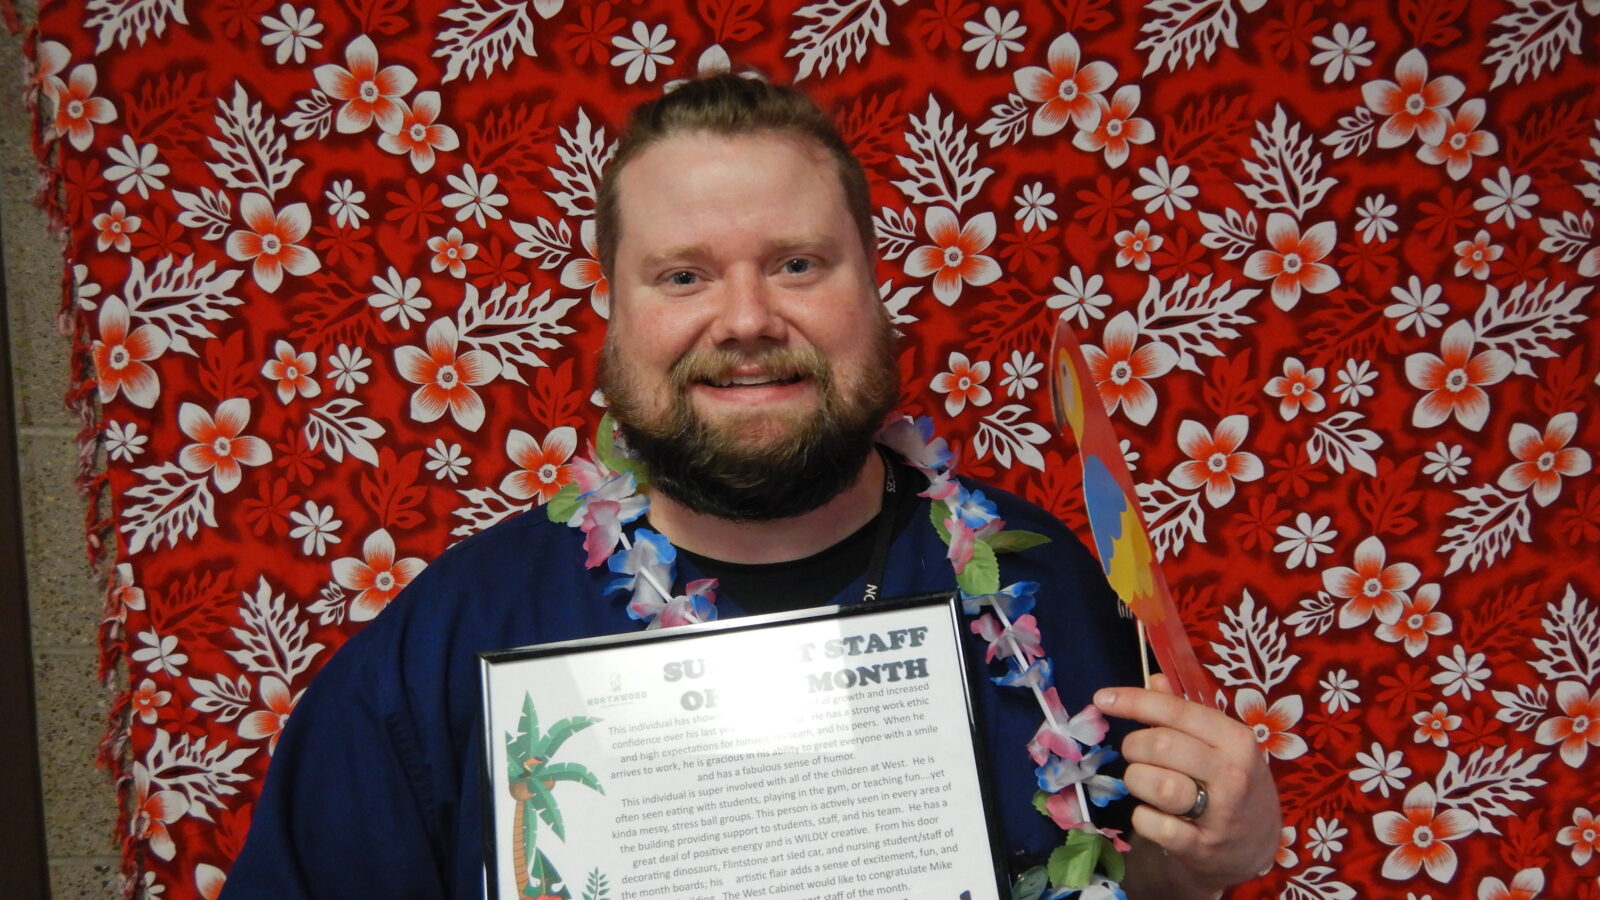 Person winning "Student Staff of the month" in front of floral background